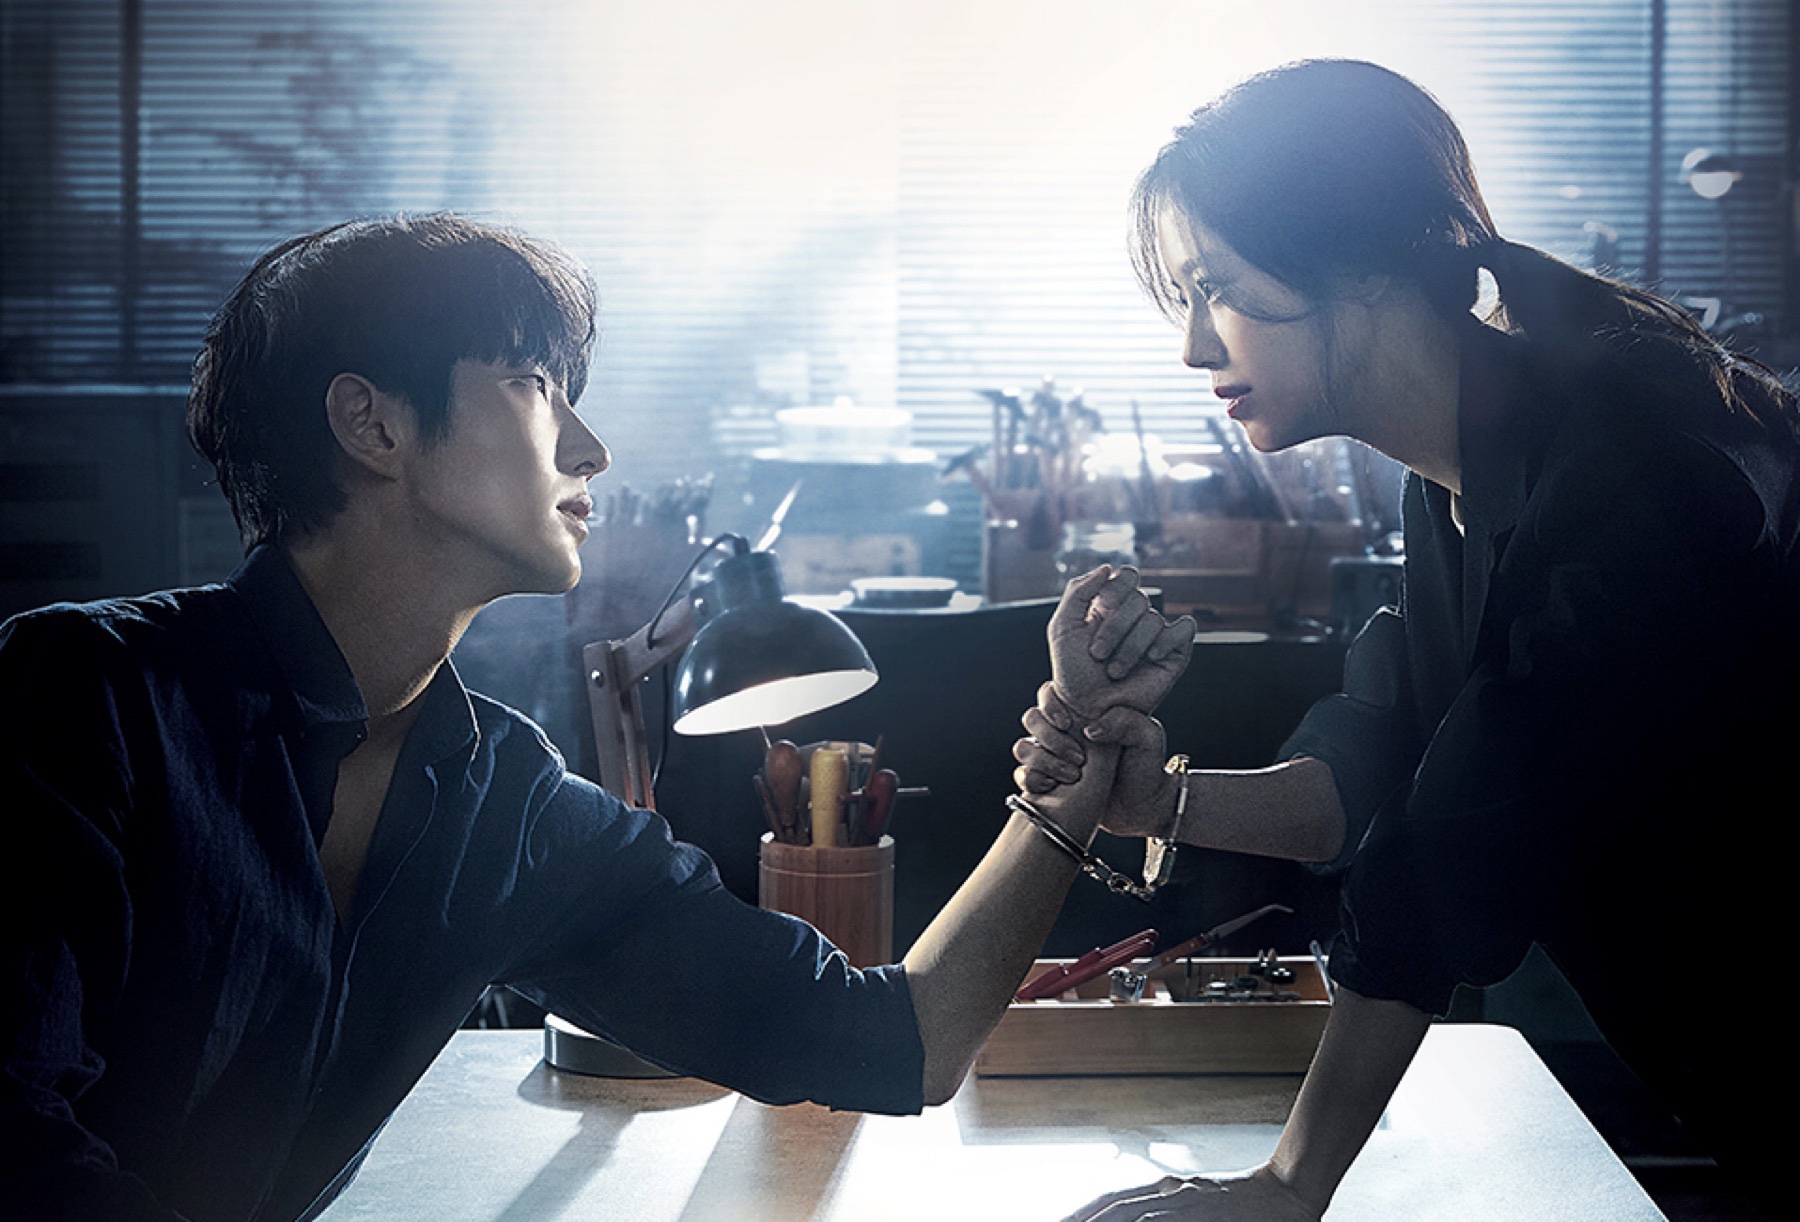 tvN’s Evil Flower reveal another teaser image of Lee Joon Gi and Moon Chae Won